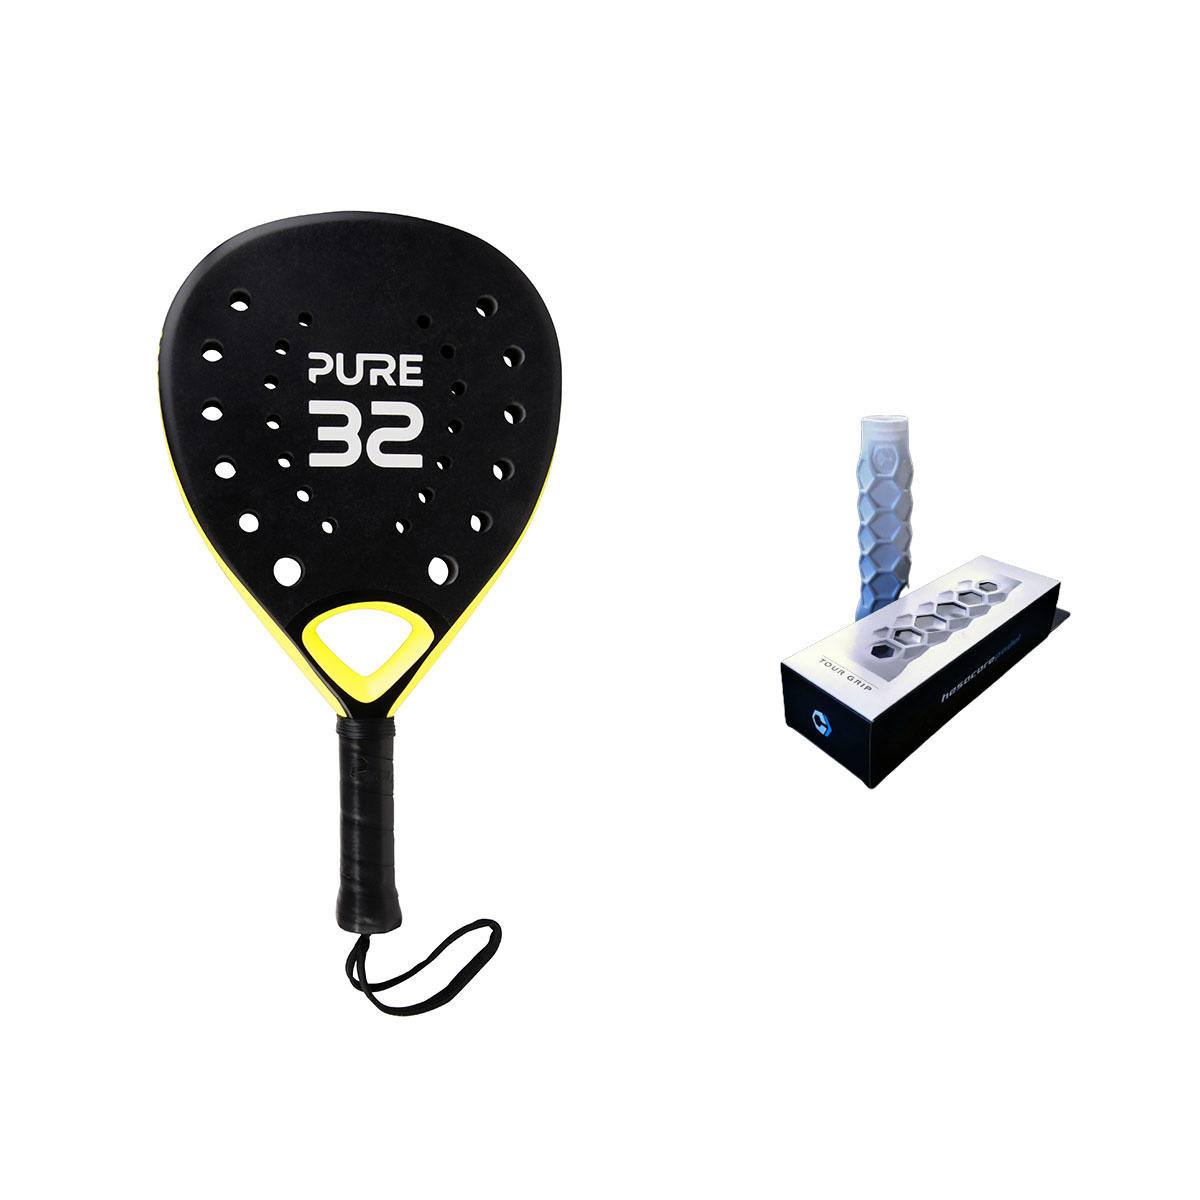 padel racket frame protector rough surface